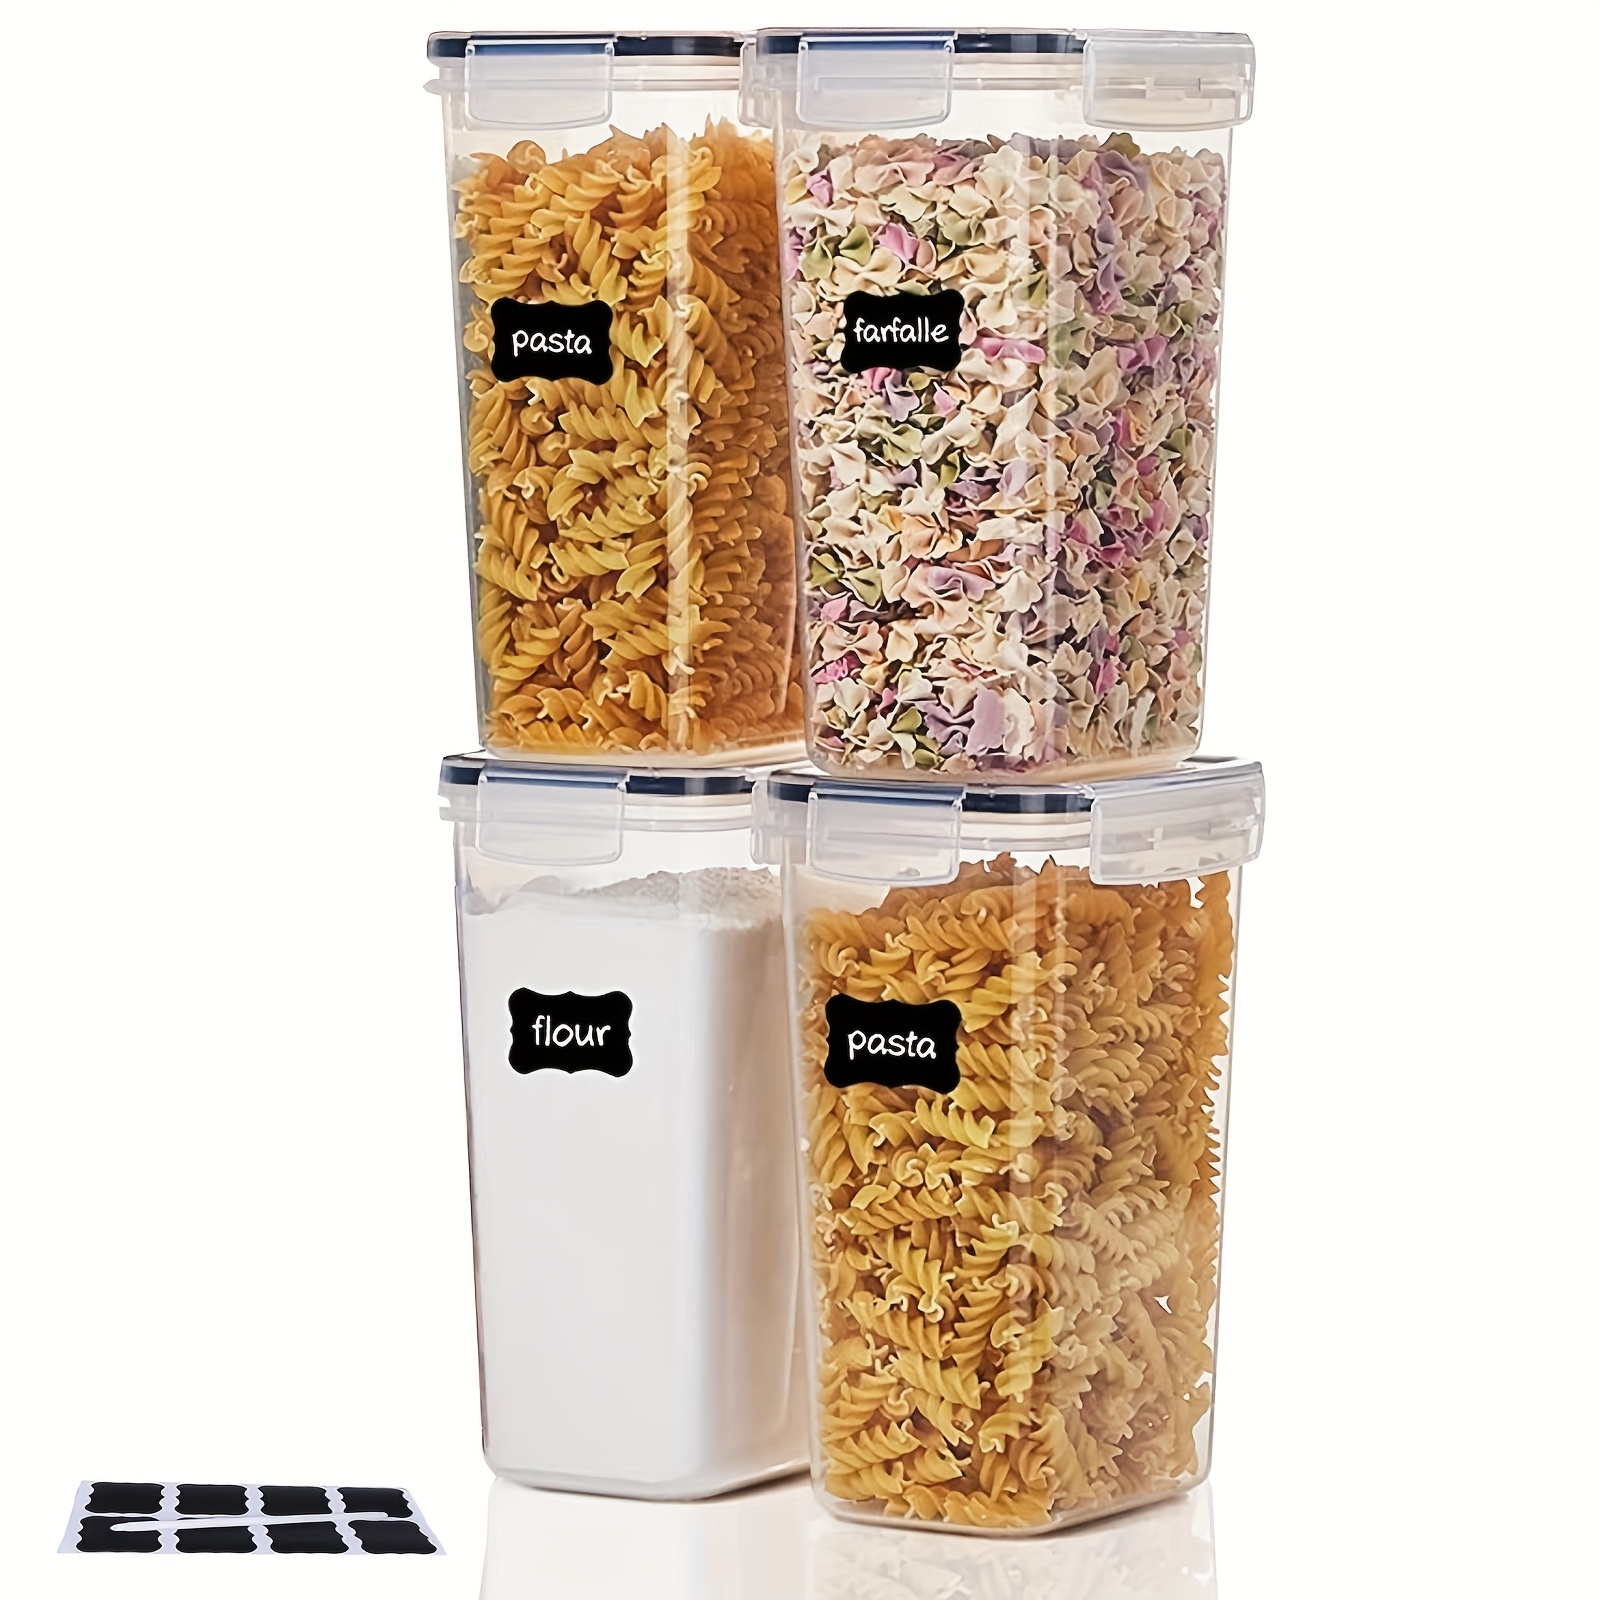 PRAKI Airtight Food Storage Container Set 16 Pcs BPA Free Plastic Dry Food Canisters for Kitchen Pantry Organization and Storage Ideal for Cereal Flou